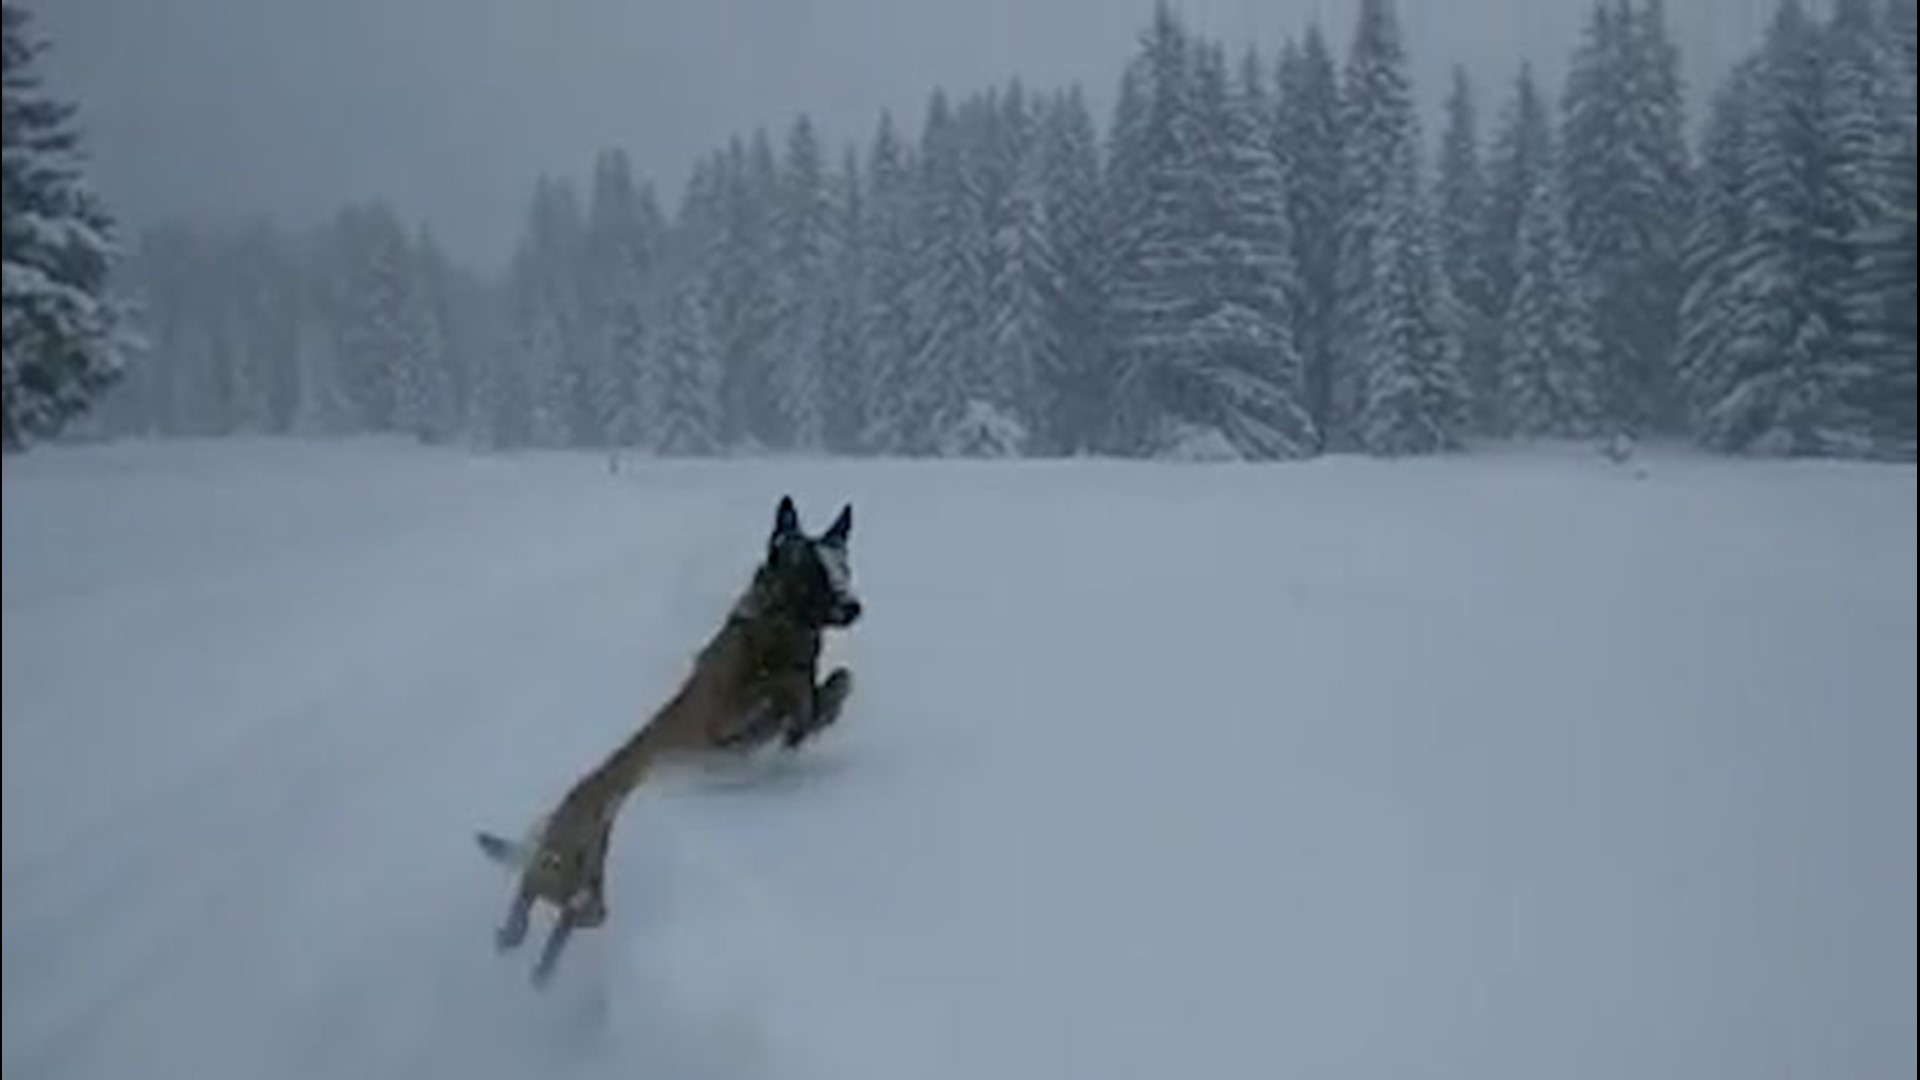 A police department in the Austrian Alps shared this video of one of their K9s diving into the snow, saying, 'Those who work hard deserve to have fun in the snow!'